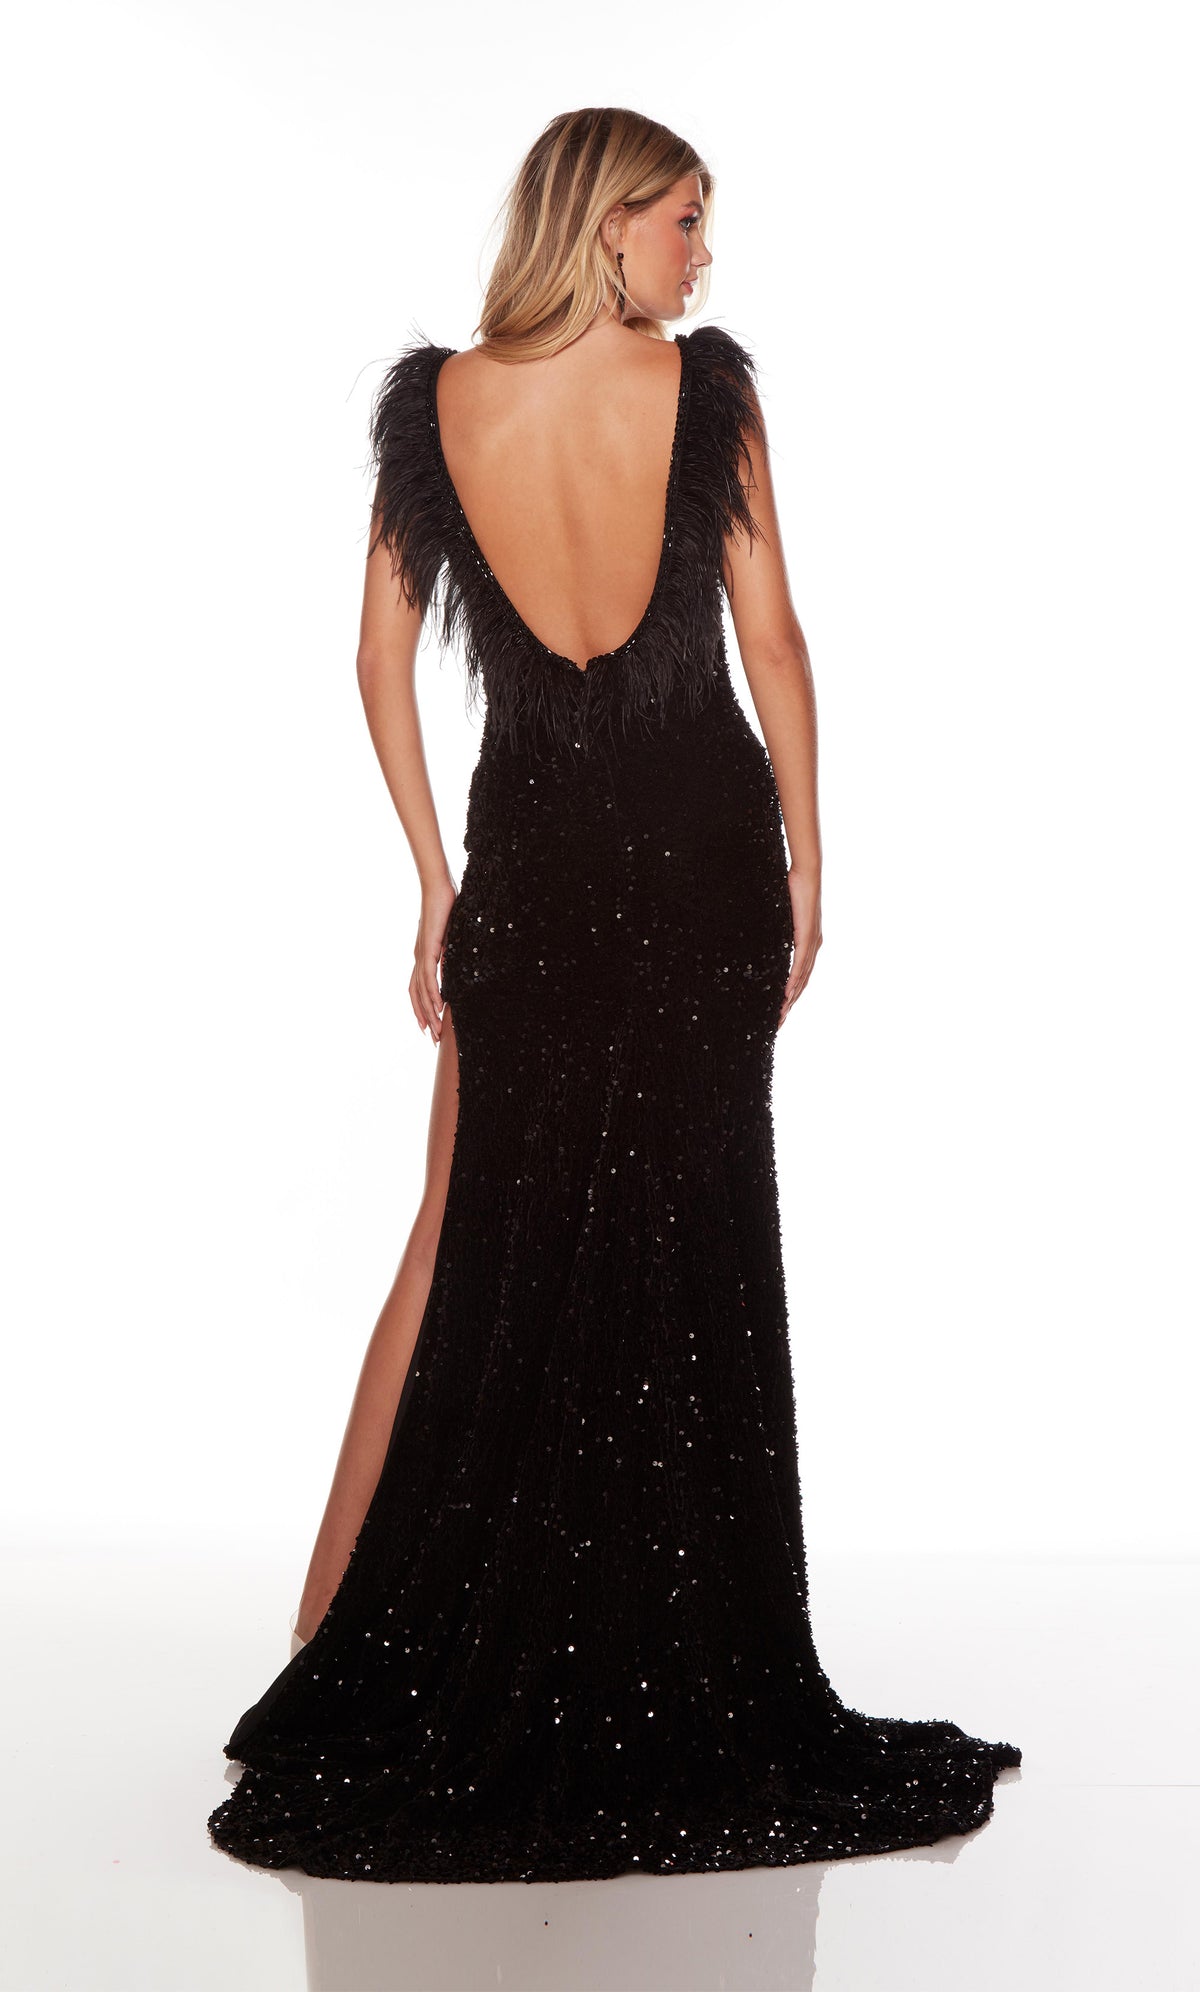 Long black formal dress with a U shaped feather trimmed back, high side slit, and train.